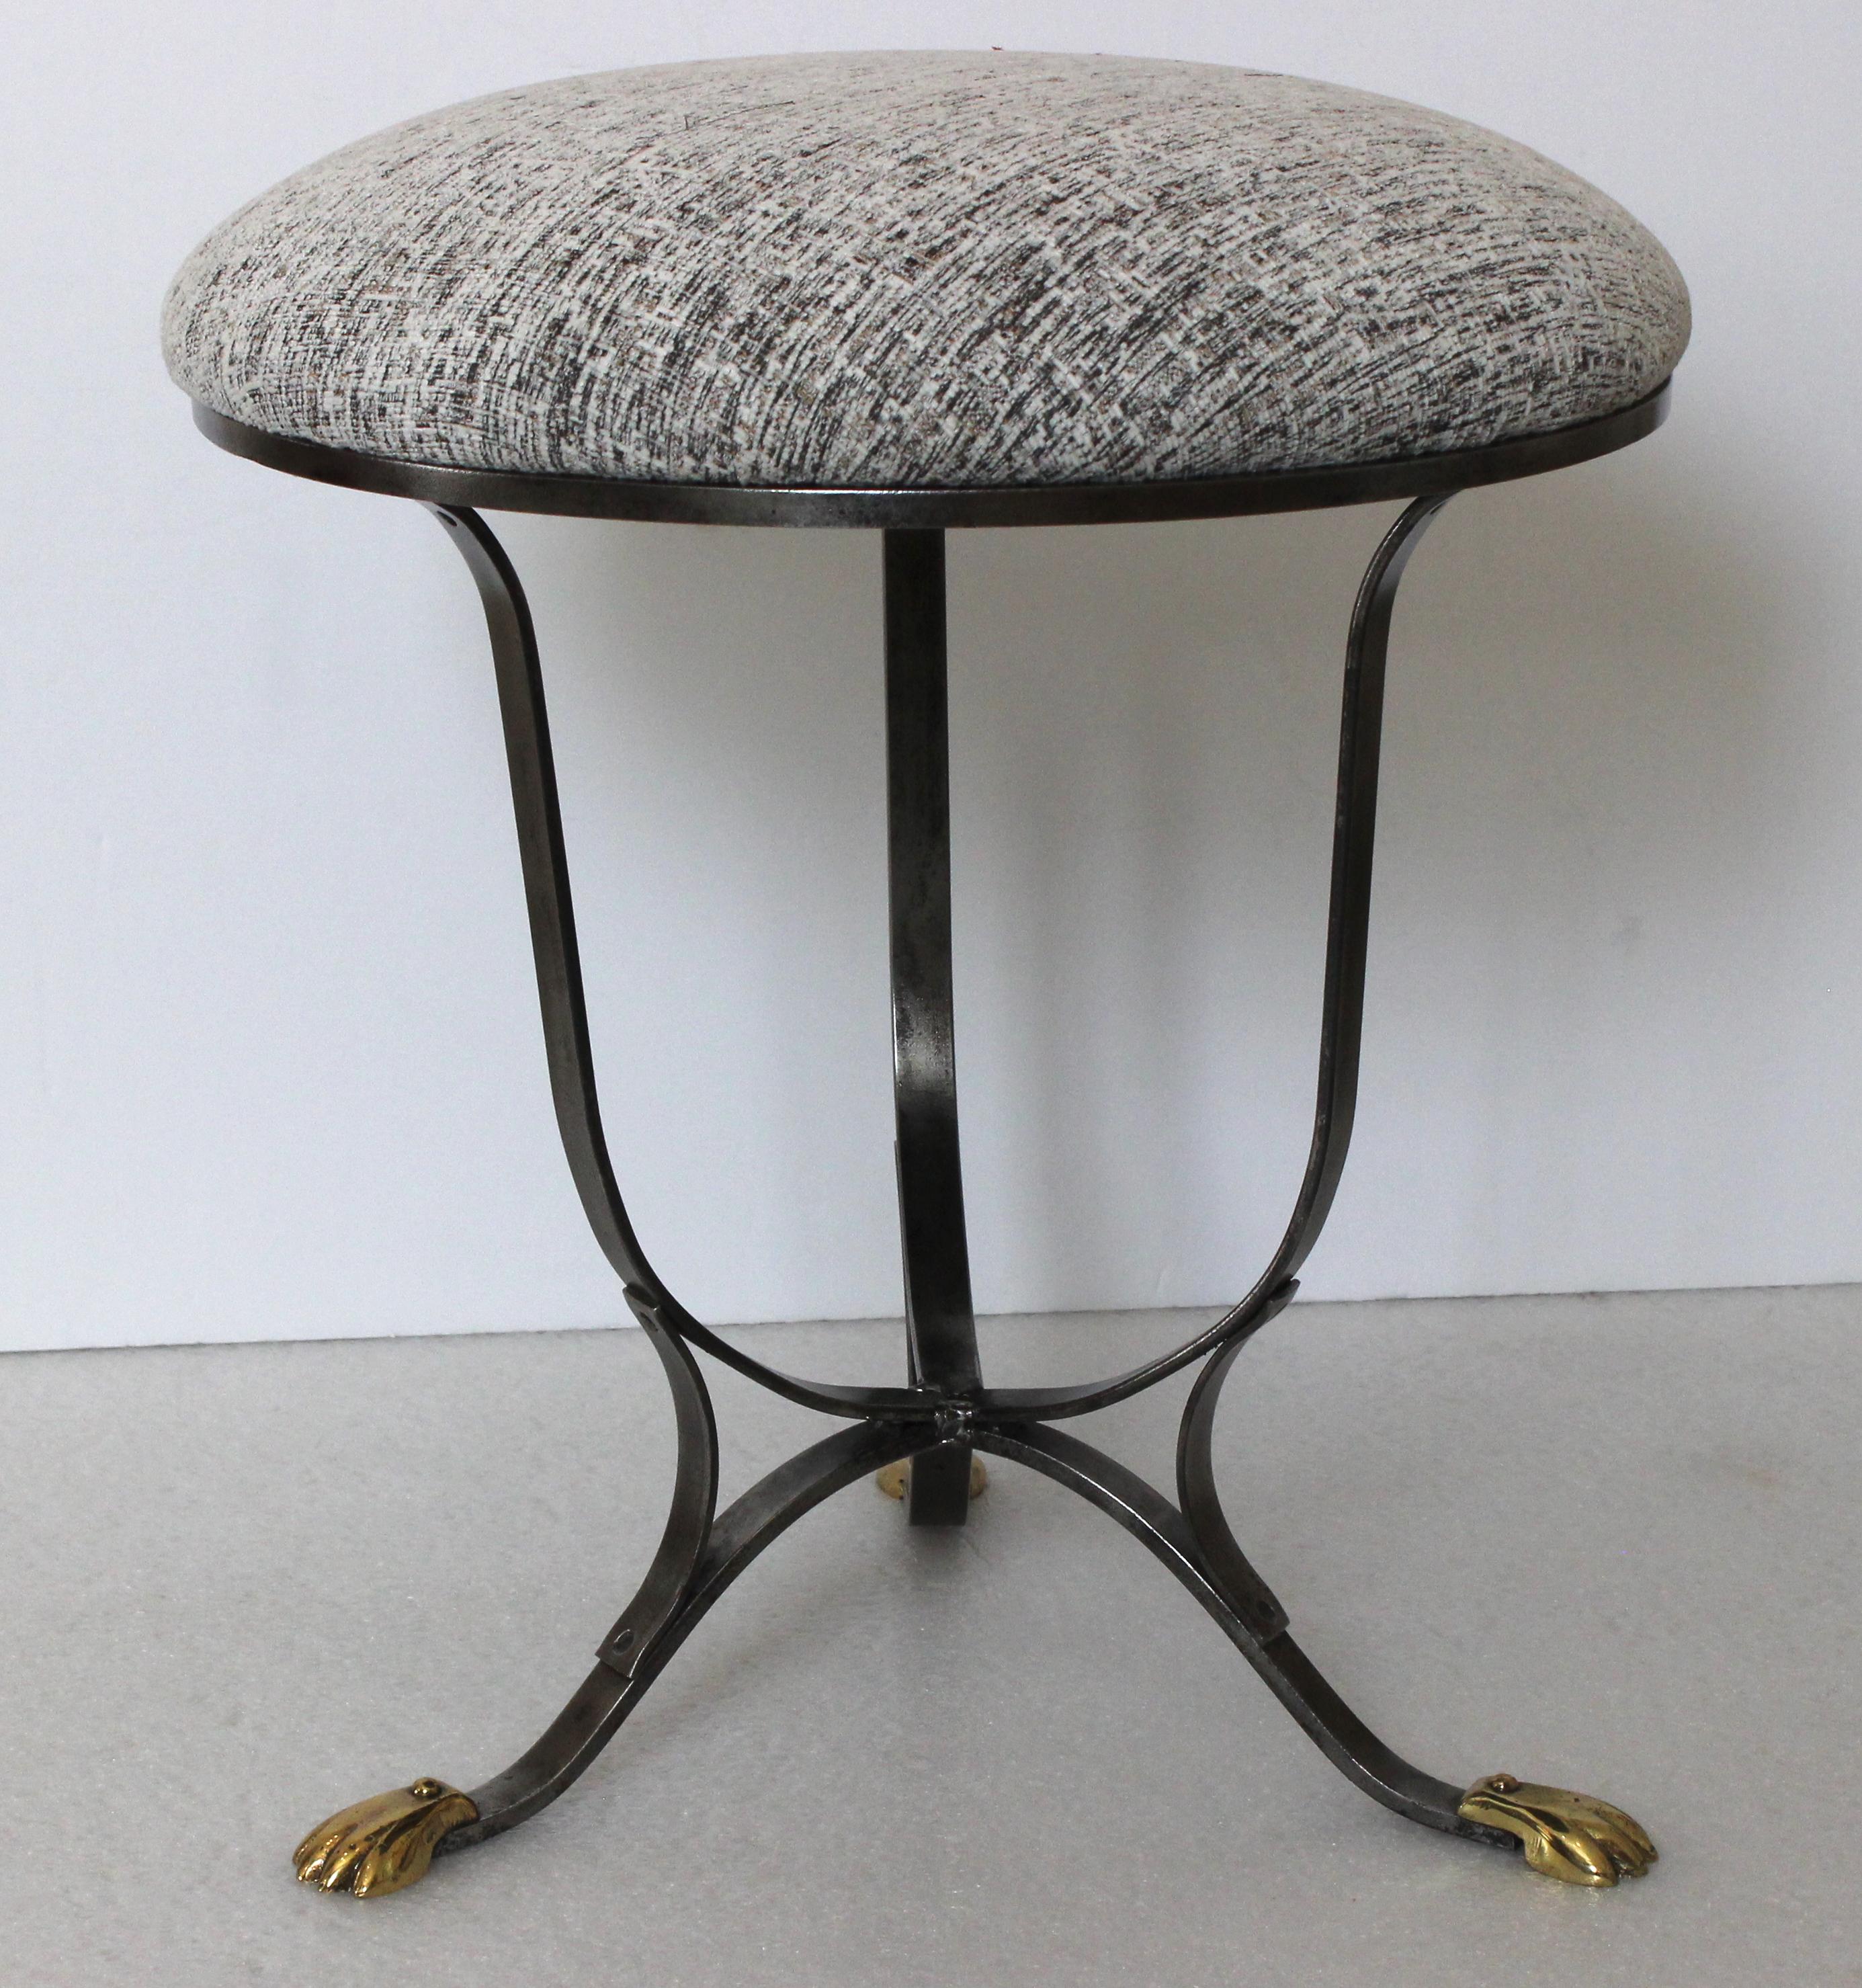 Woven Trouvailles French Empire Campaign Stool For Sale